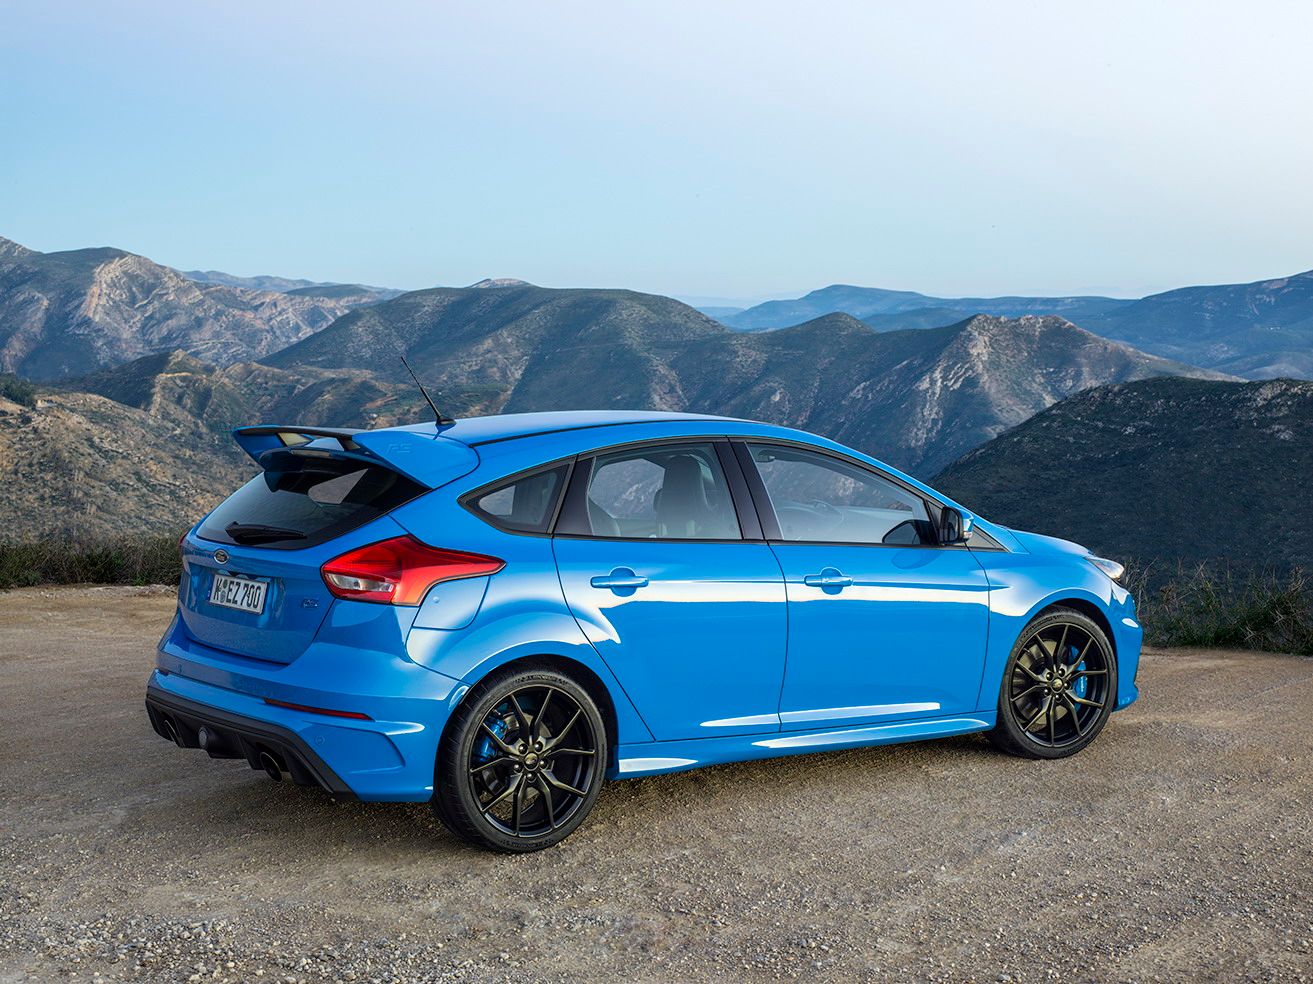 2016 Ford Focus RS - Driving Impressions